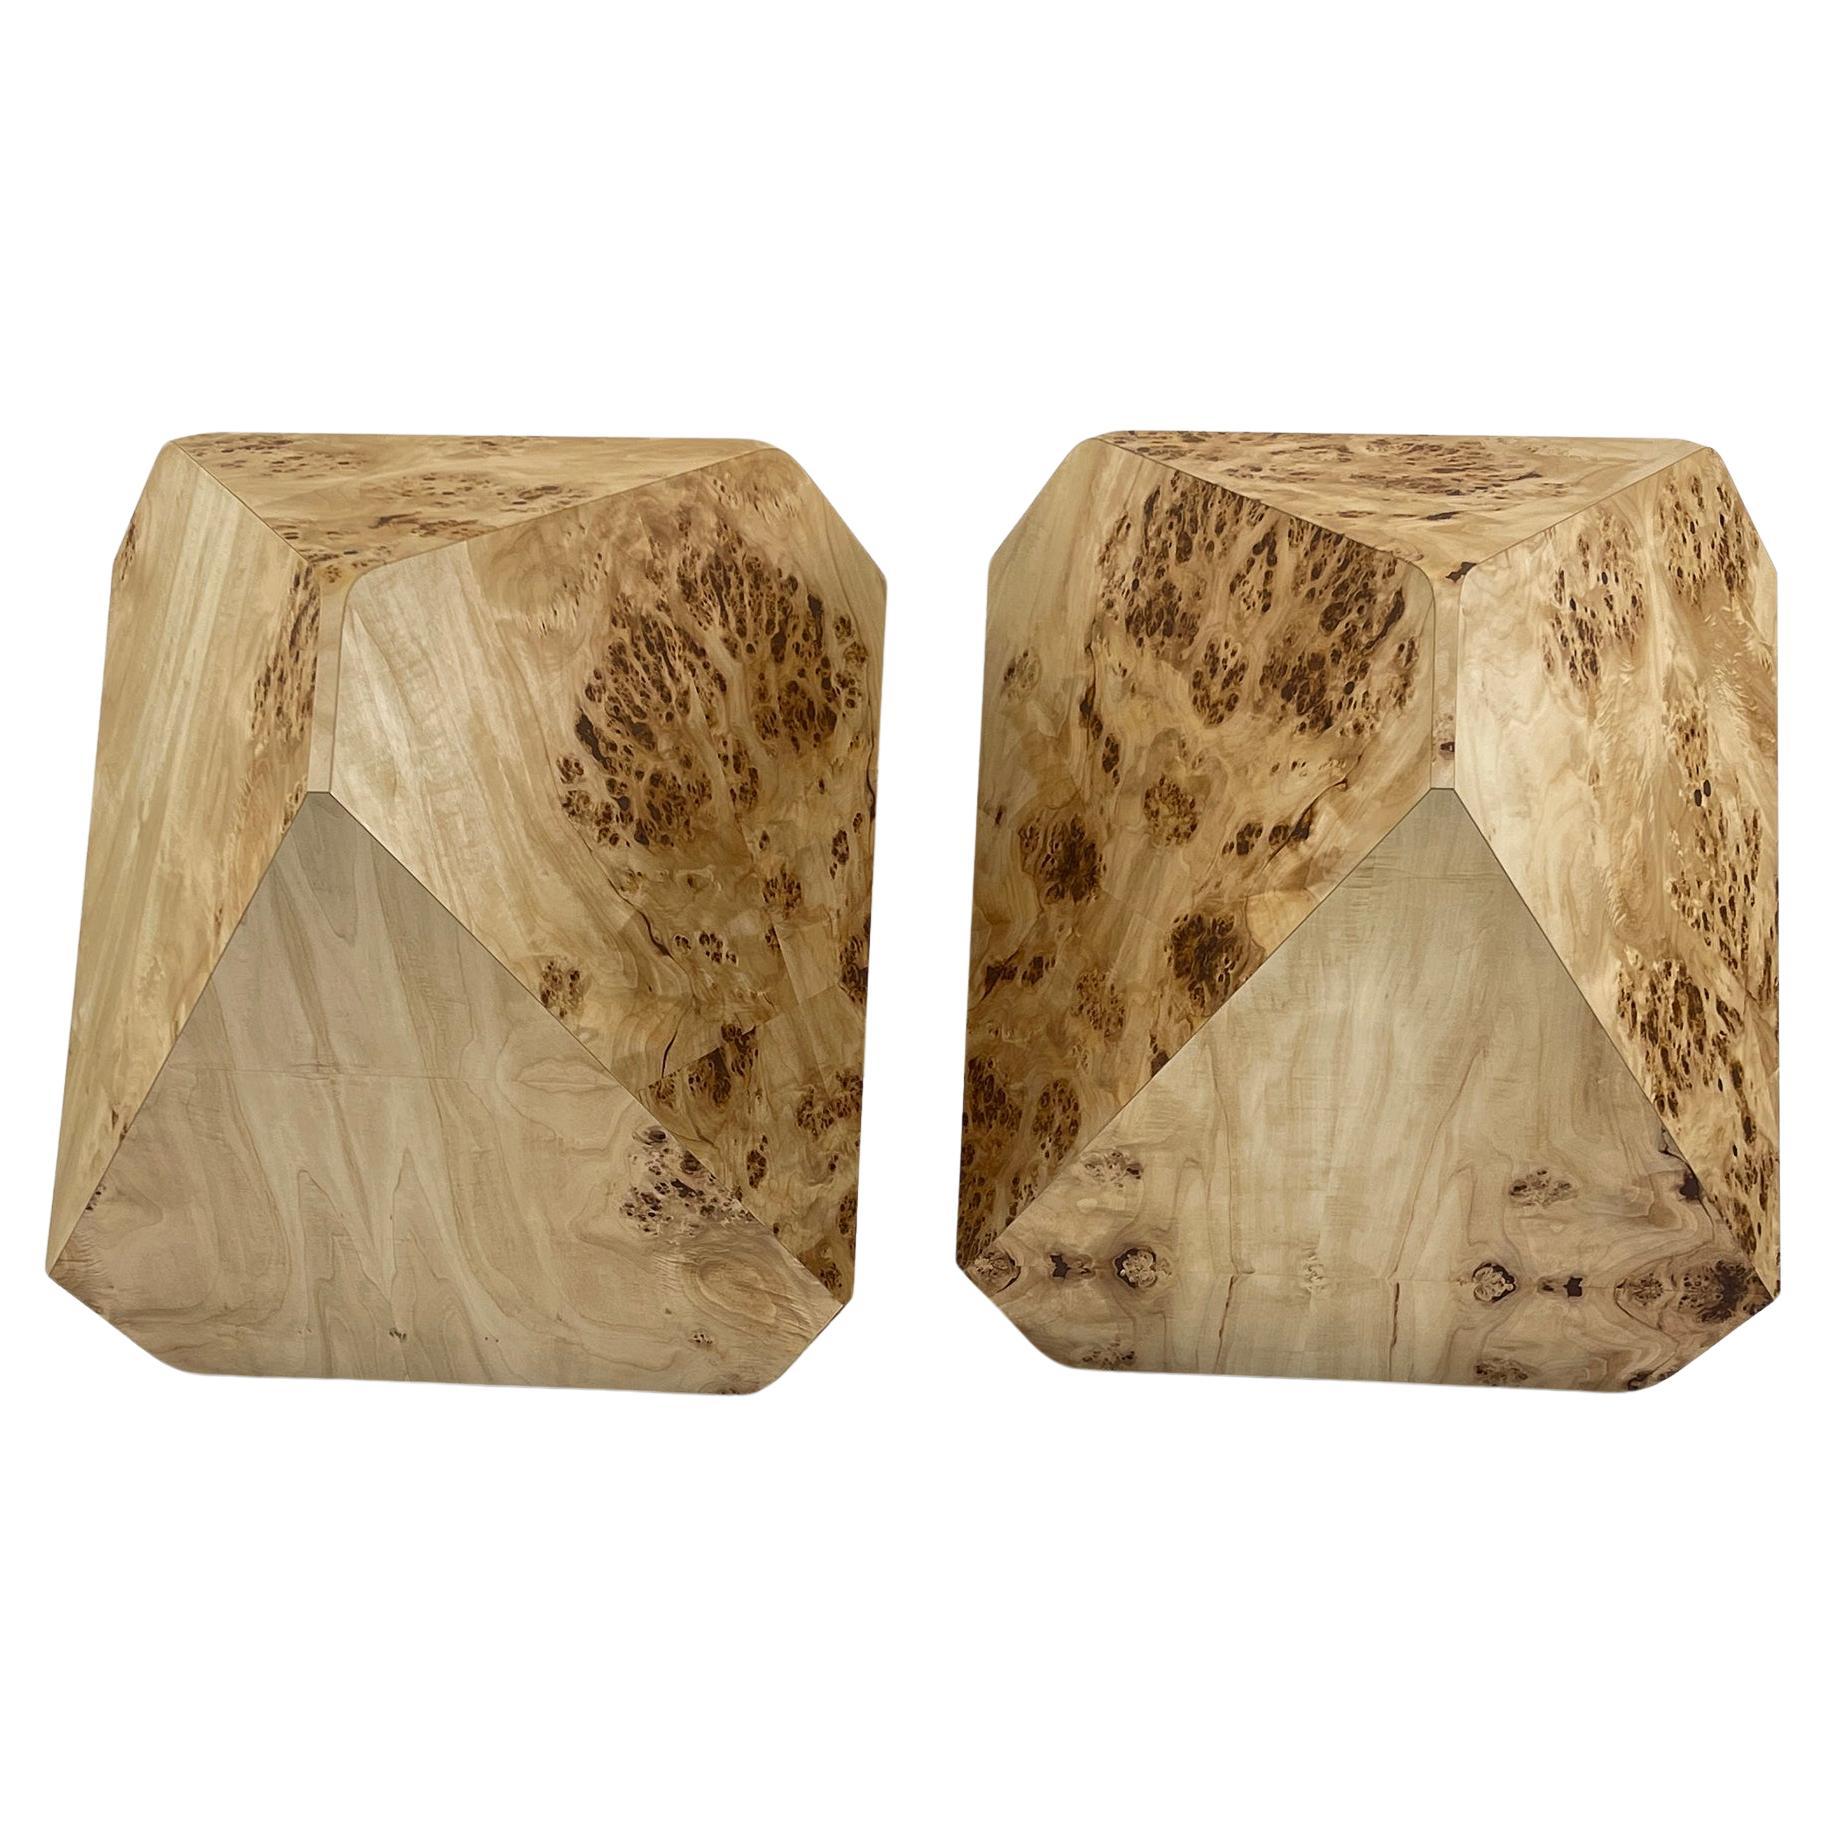 William Earle's iconic 'hal' dining pedestals in European Mappa burl For Sale